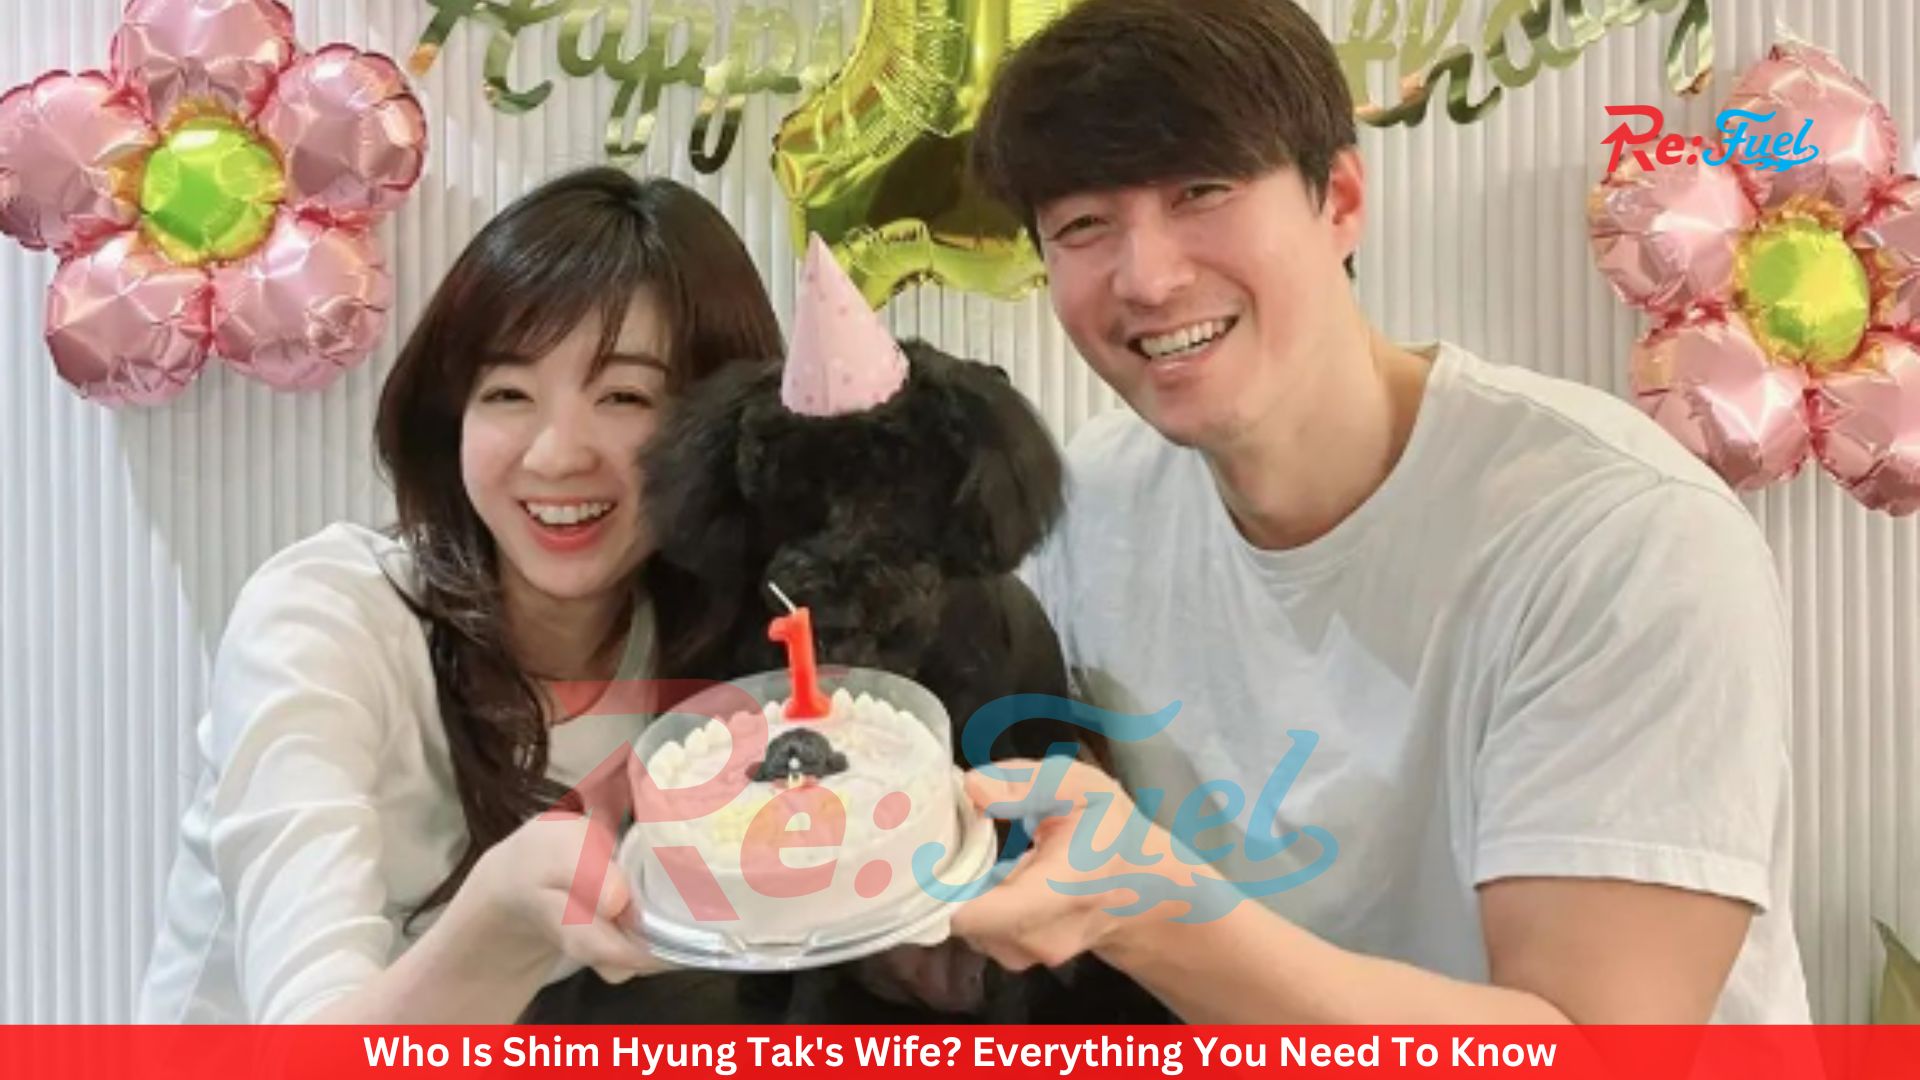 Who Is Shim Hyung Tak's Wife? Everything You Need To Know